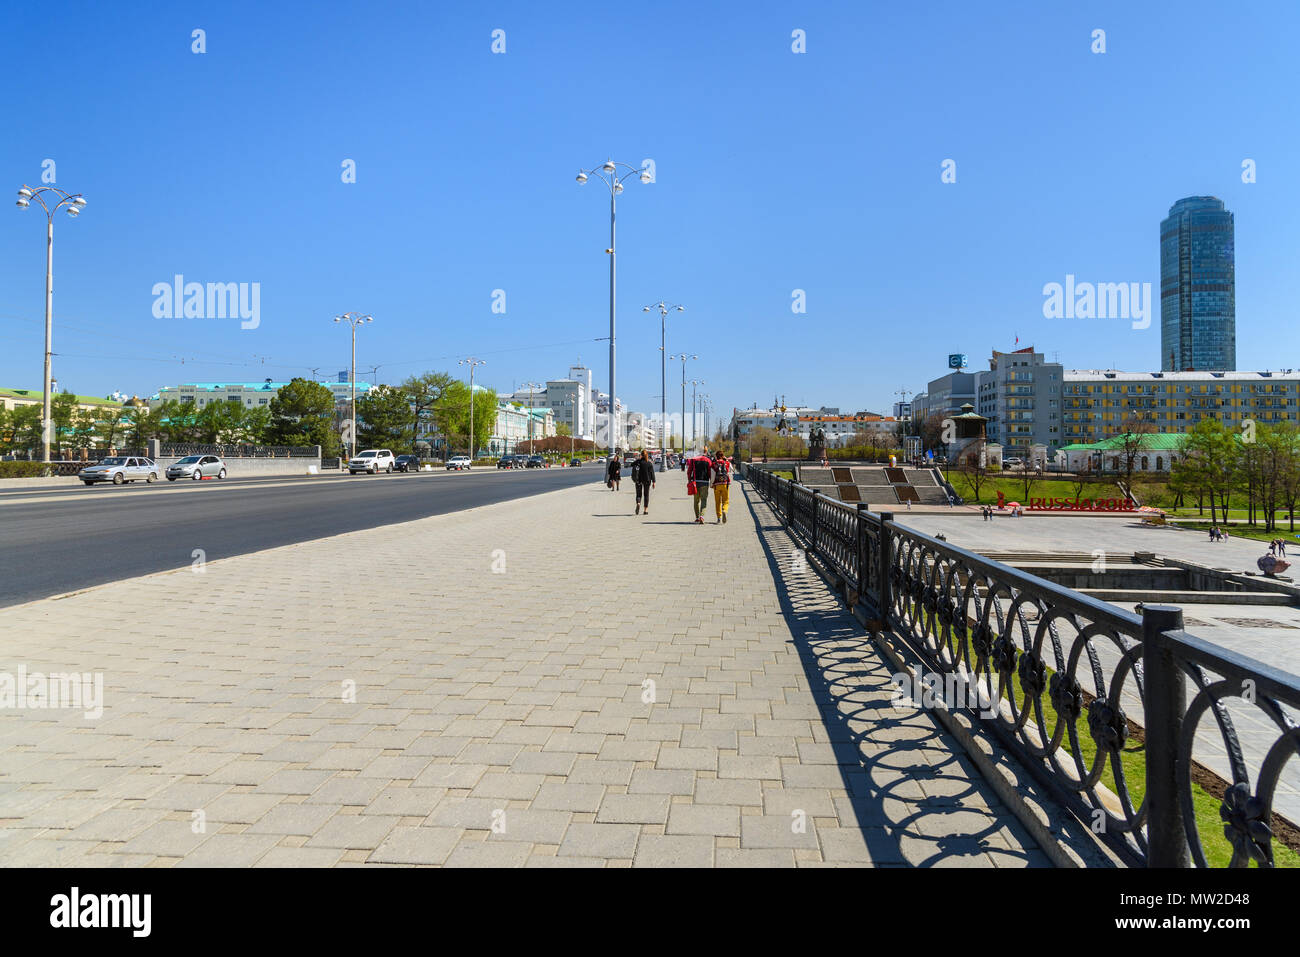 Yekaterinburg, Russia - May 23, 2018: View of Lenin avenue and Historical Square on Iset River in center of city Stock Photo